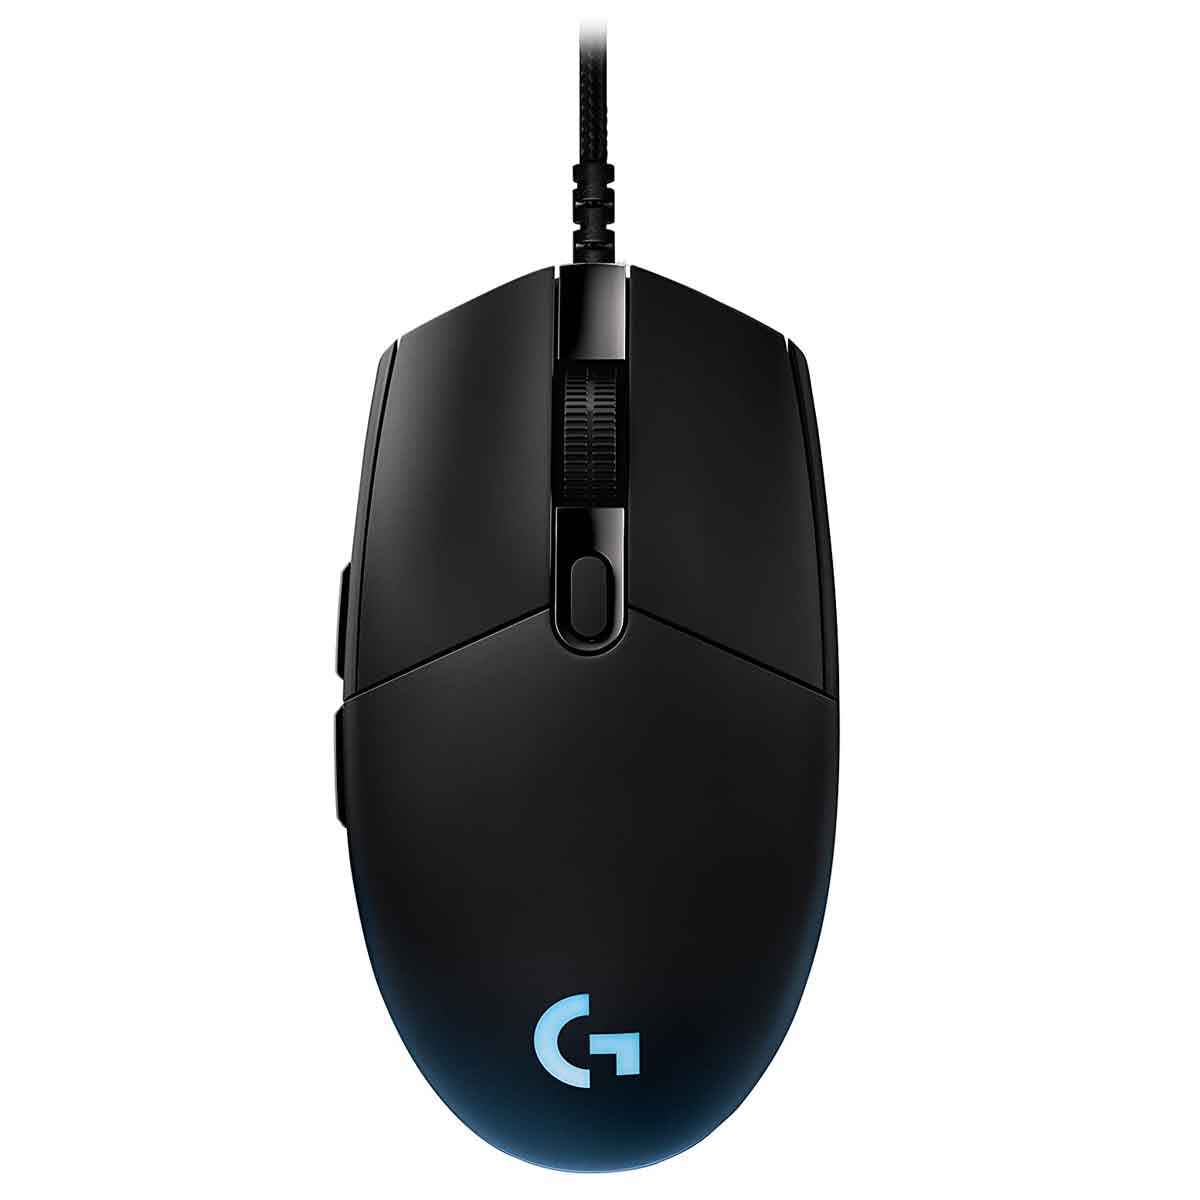 Logitech G Pro Gaming mouse